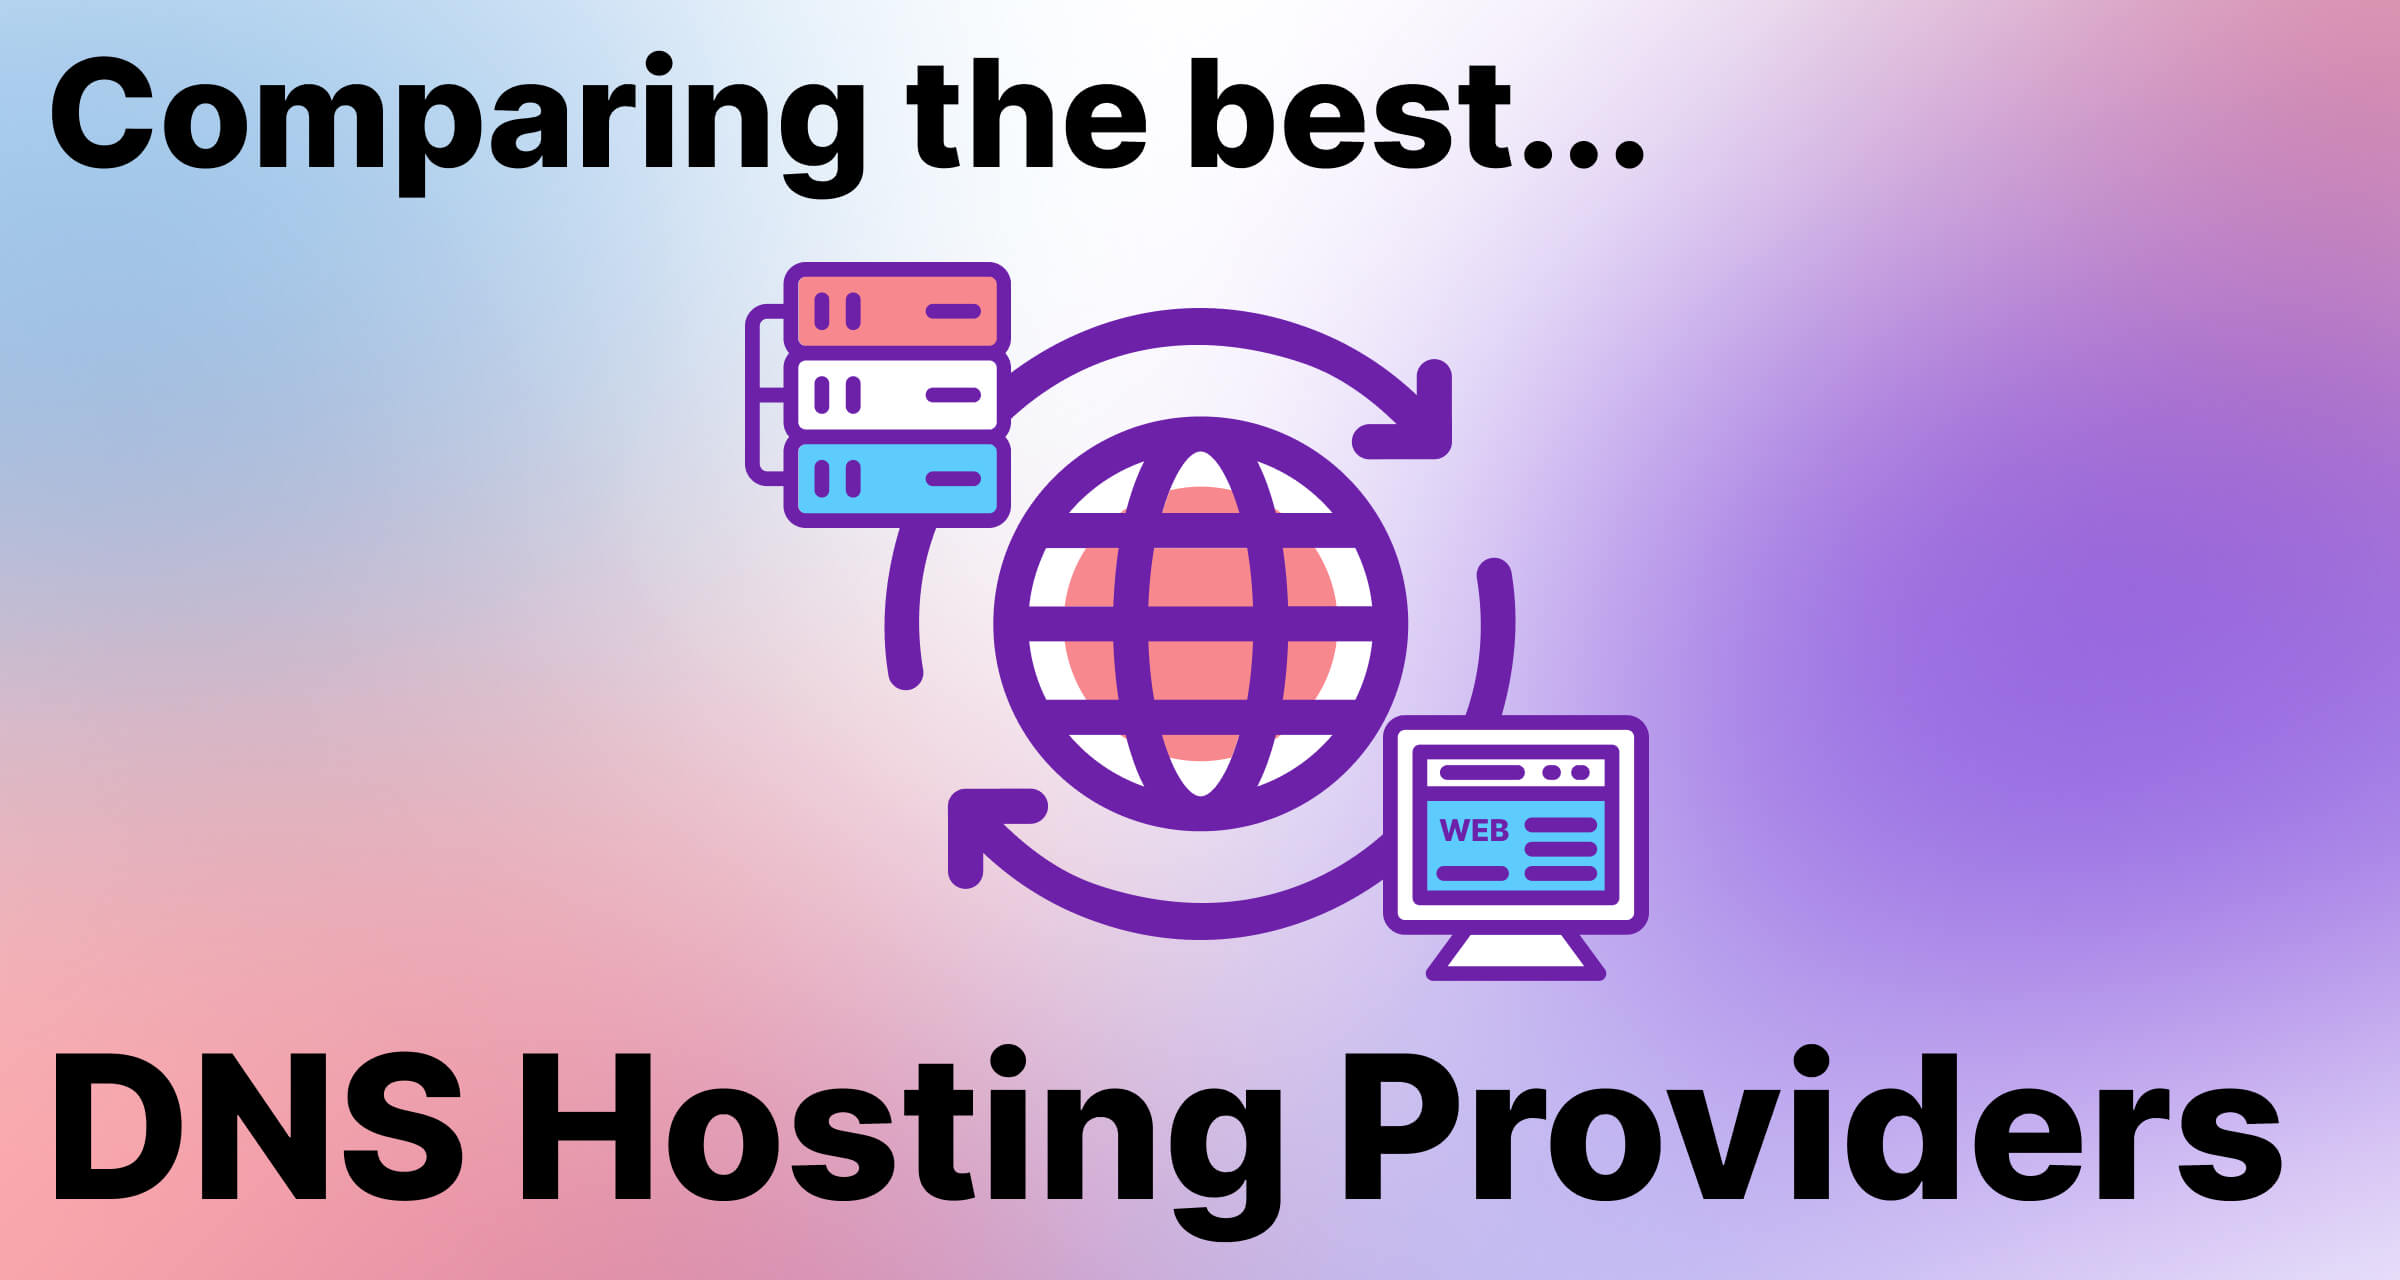 Comparing the best DNS Hosting Providers